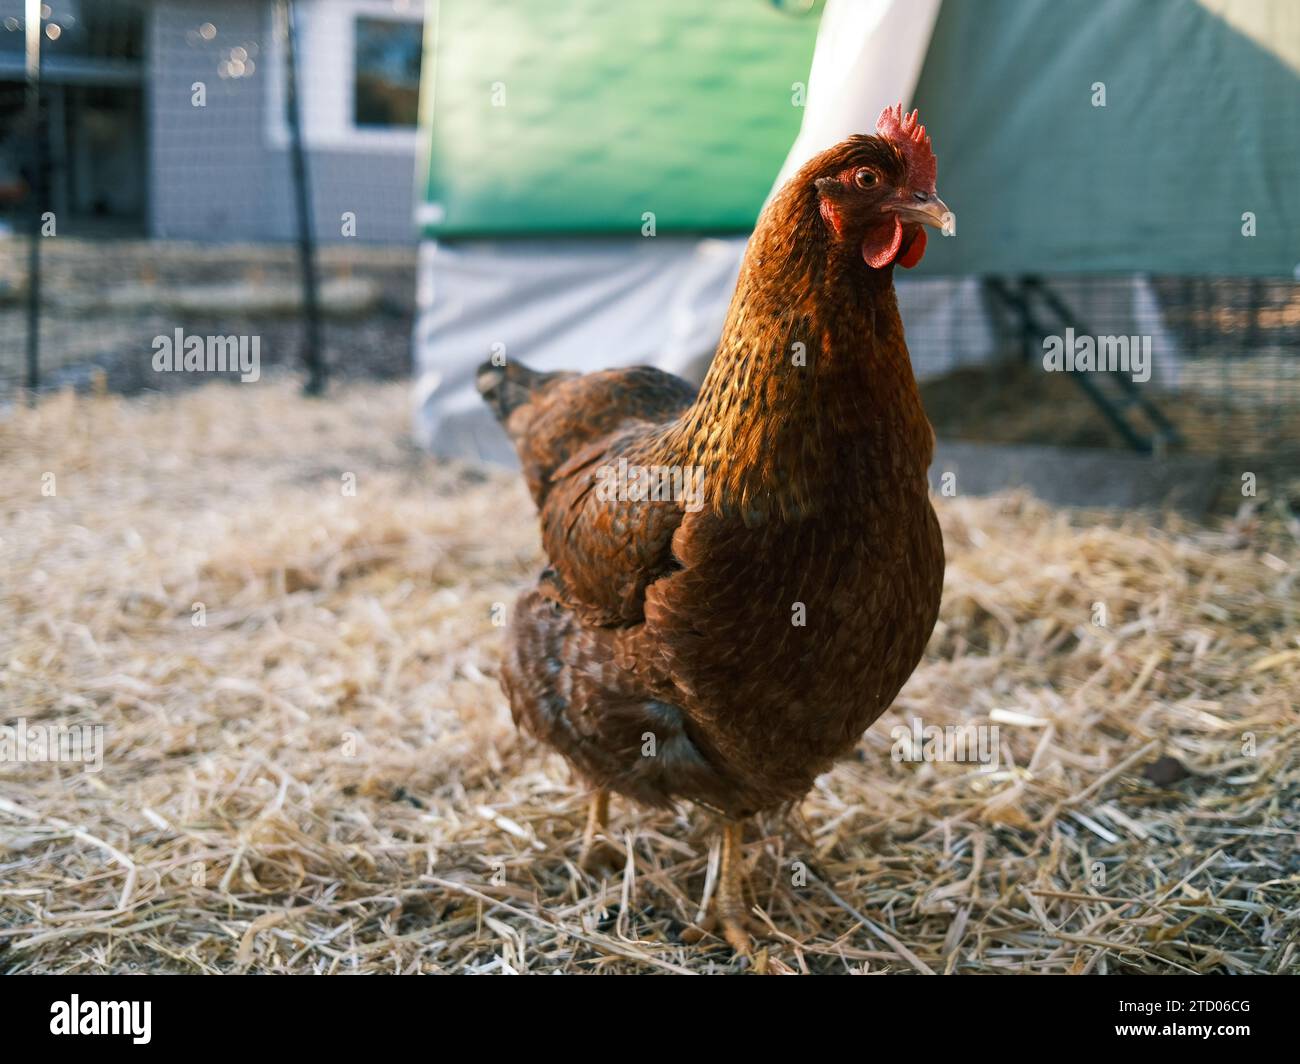 Organic farm chicken with feathers and comb Stock Photo